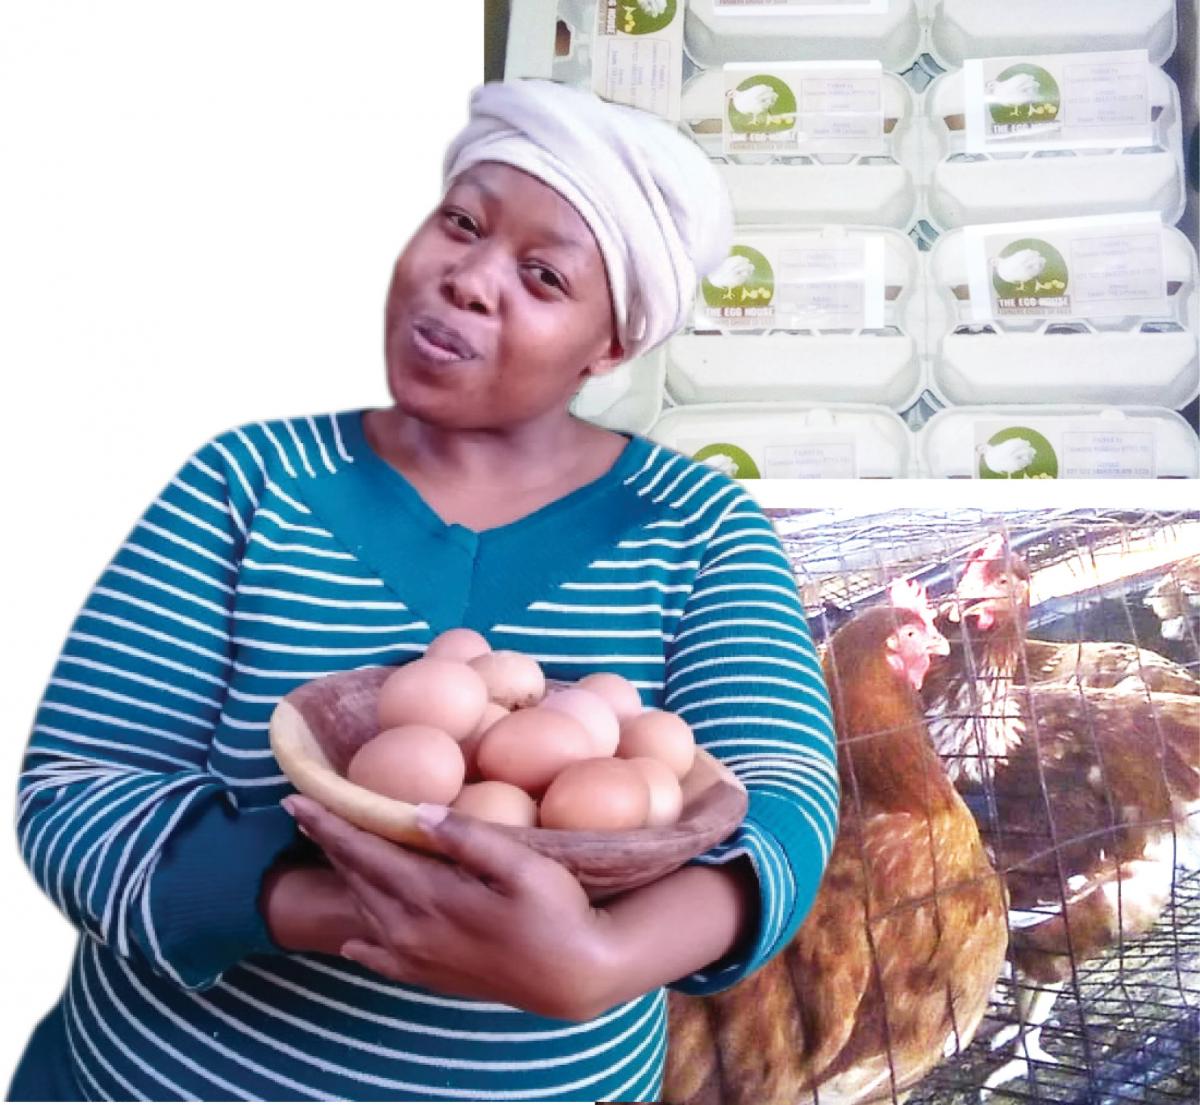 Malesiba Mabitsela supplies eggs to local shops in her area.